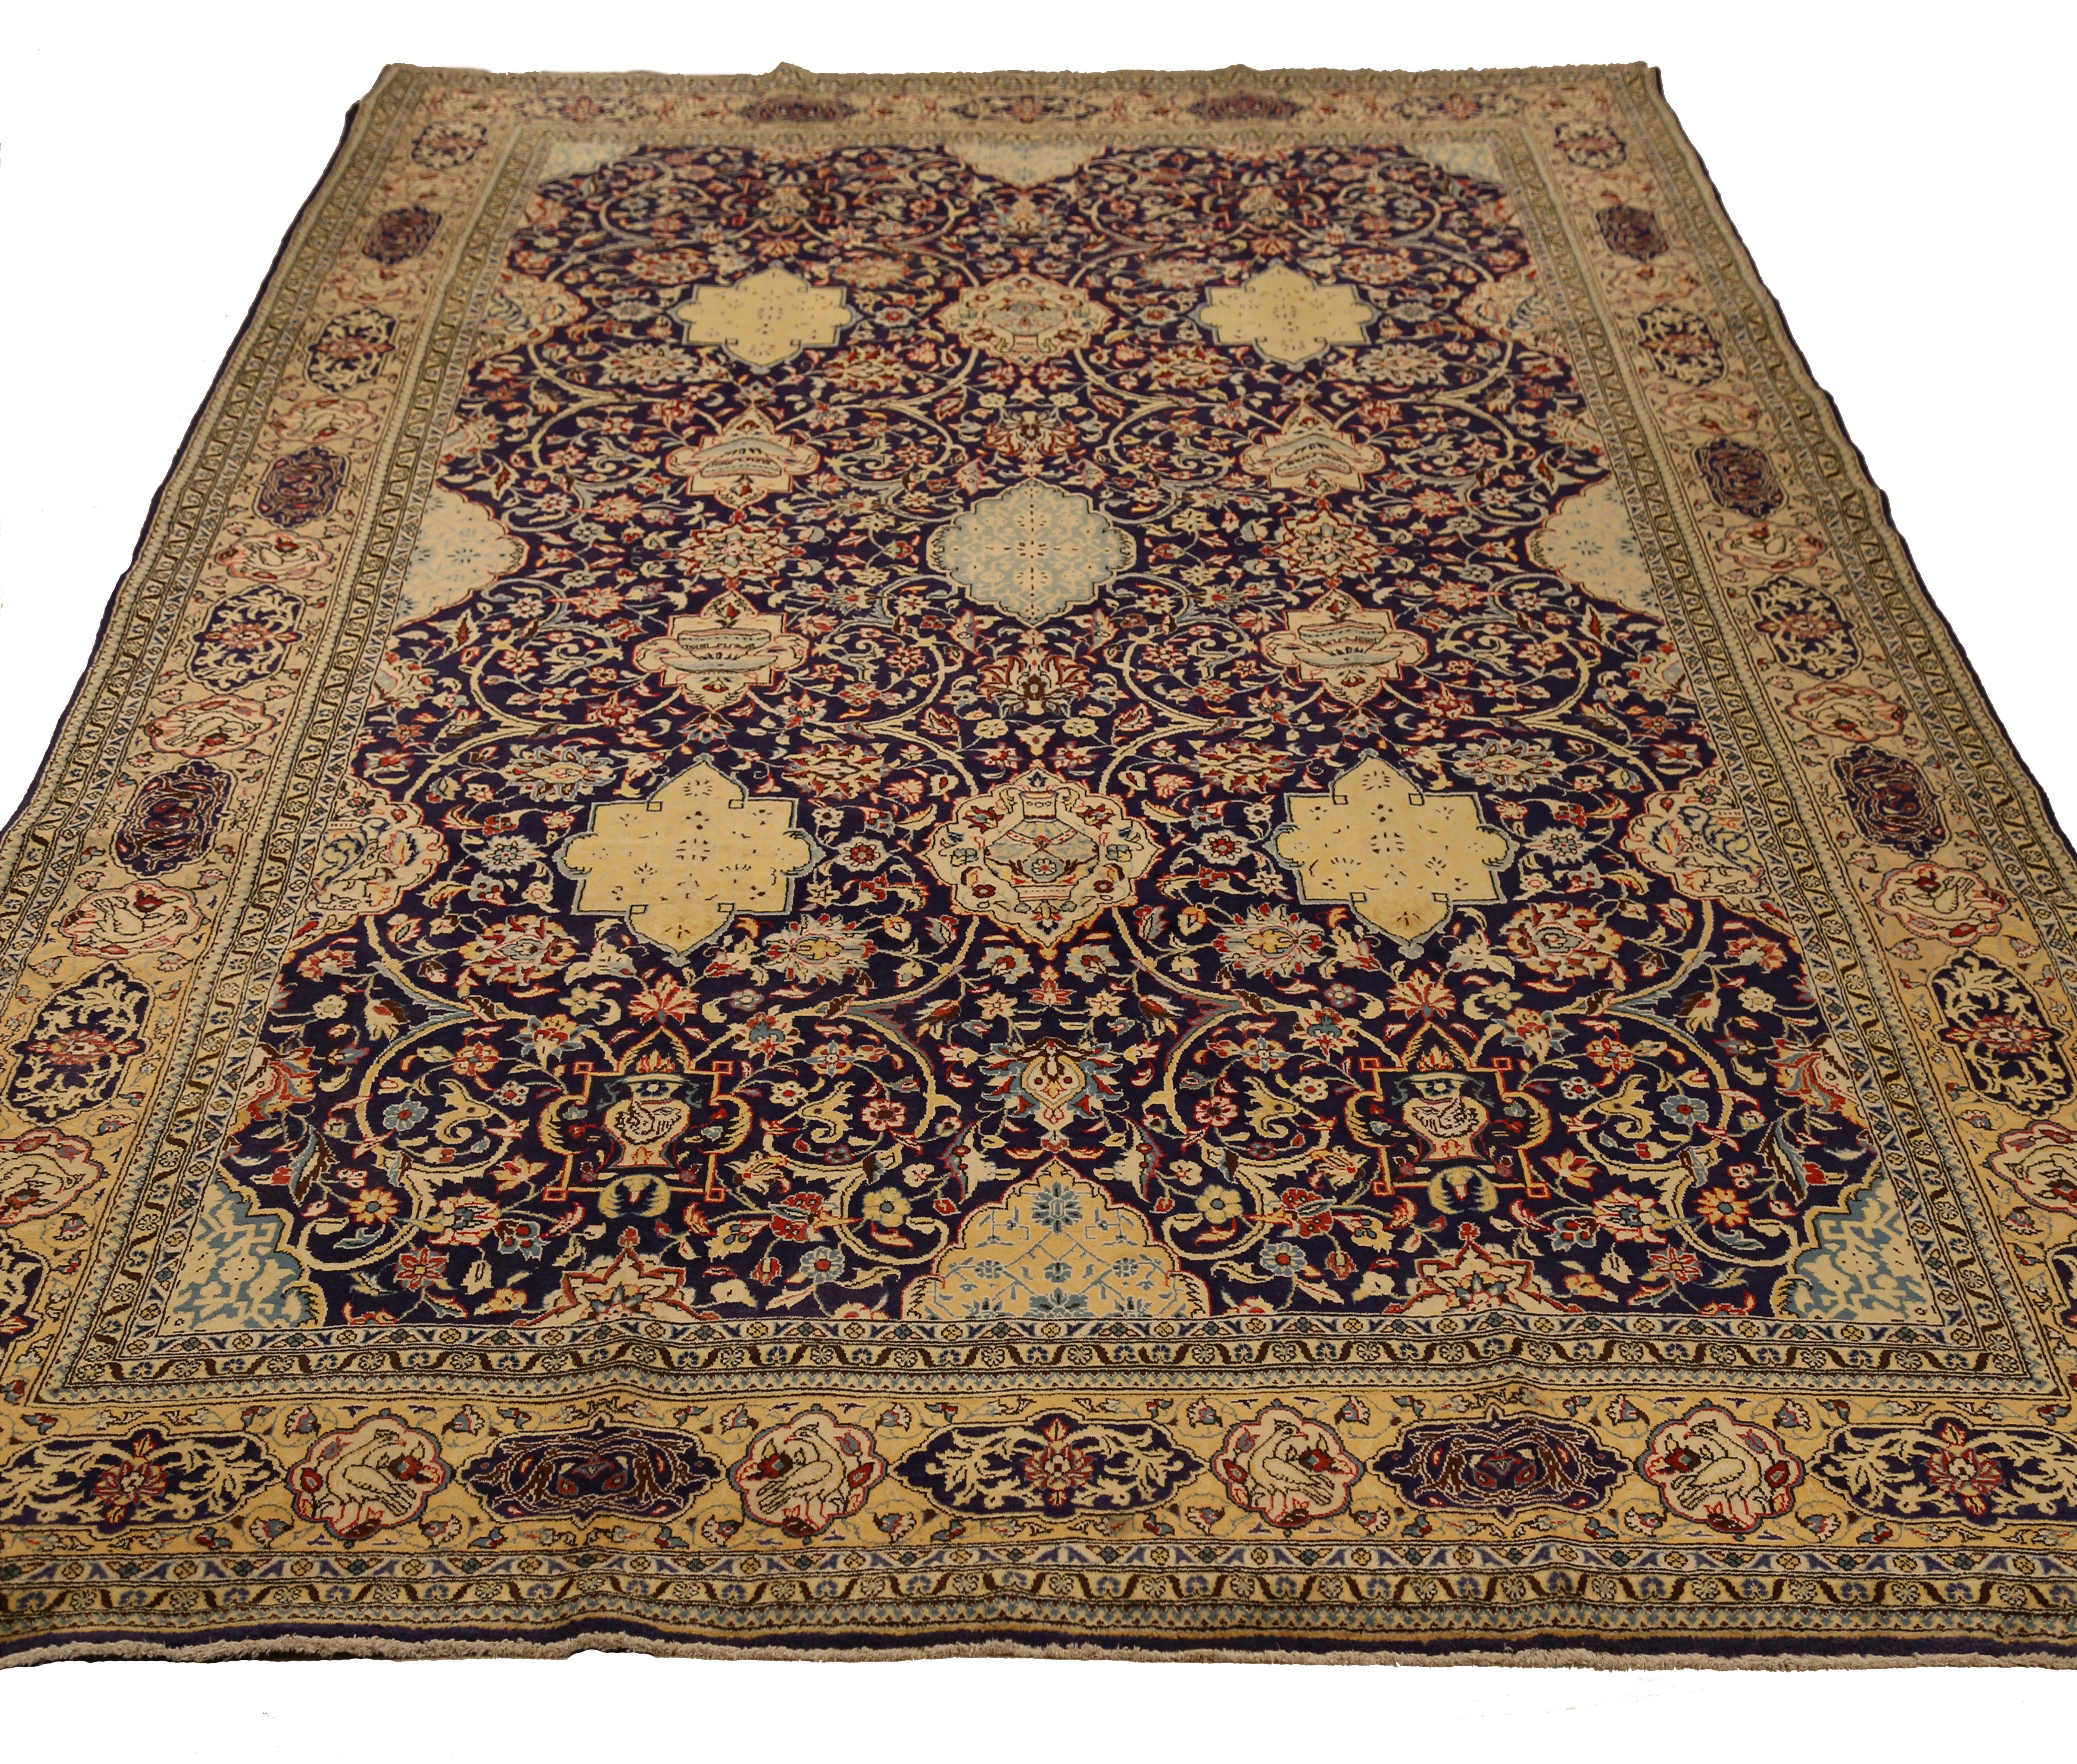 Hand-woven Persian rug made from fine wool and all-natural vegetable dyes. It's a magnificent piece featuring an intricate mix of floral and botanical patterns that made Qom design one of the most sought-after area rugs made in ancient Iran. The